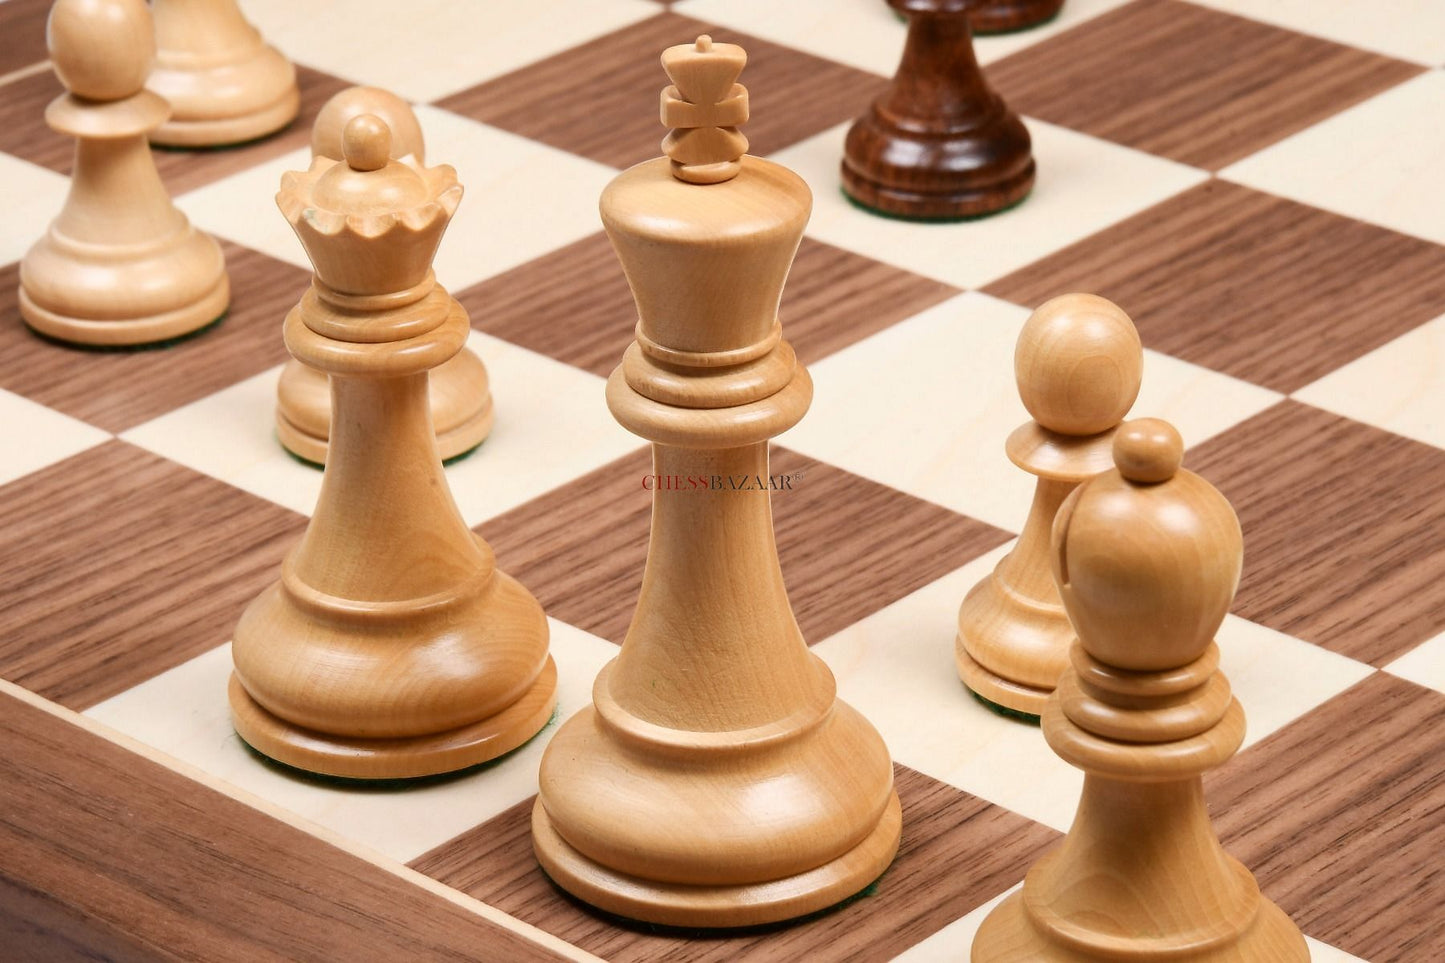 1972 Reproduced Fischer-Spassky Staunton Pattern Chess Pieces V2.0 in Sheesham Wood & Boxwood - 3.75" King